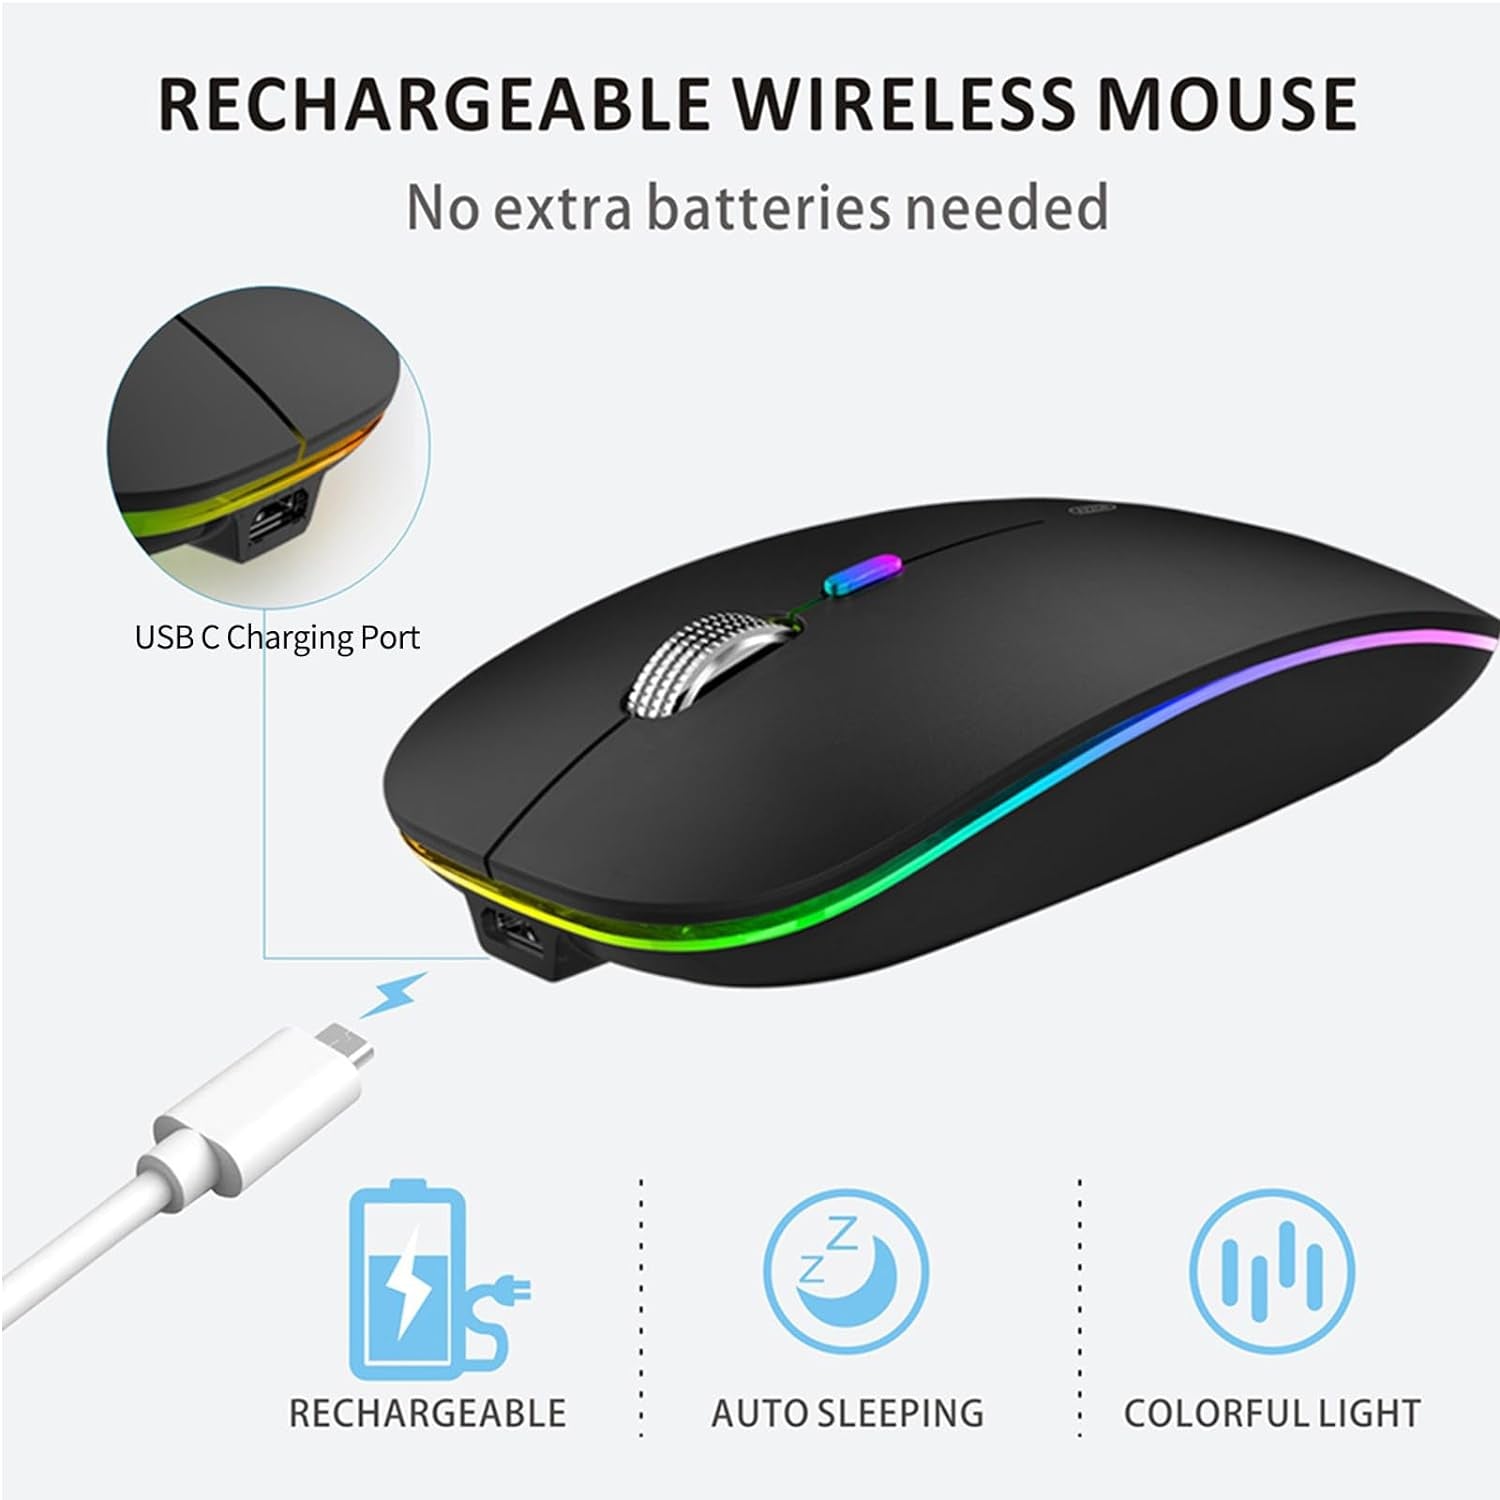 LED Wireless Mouse, G12 Slim Rechargeable Wireless Silent Mouse, 2.4G Portable USB Optical Wireless Computer Mice with USB Receiver and Type C Adapter (Matte Black)